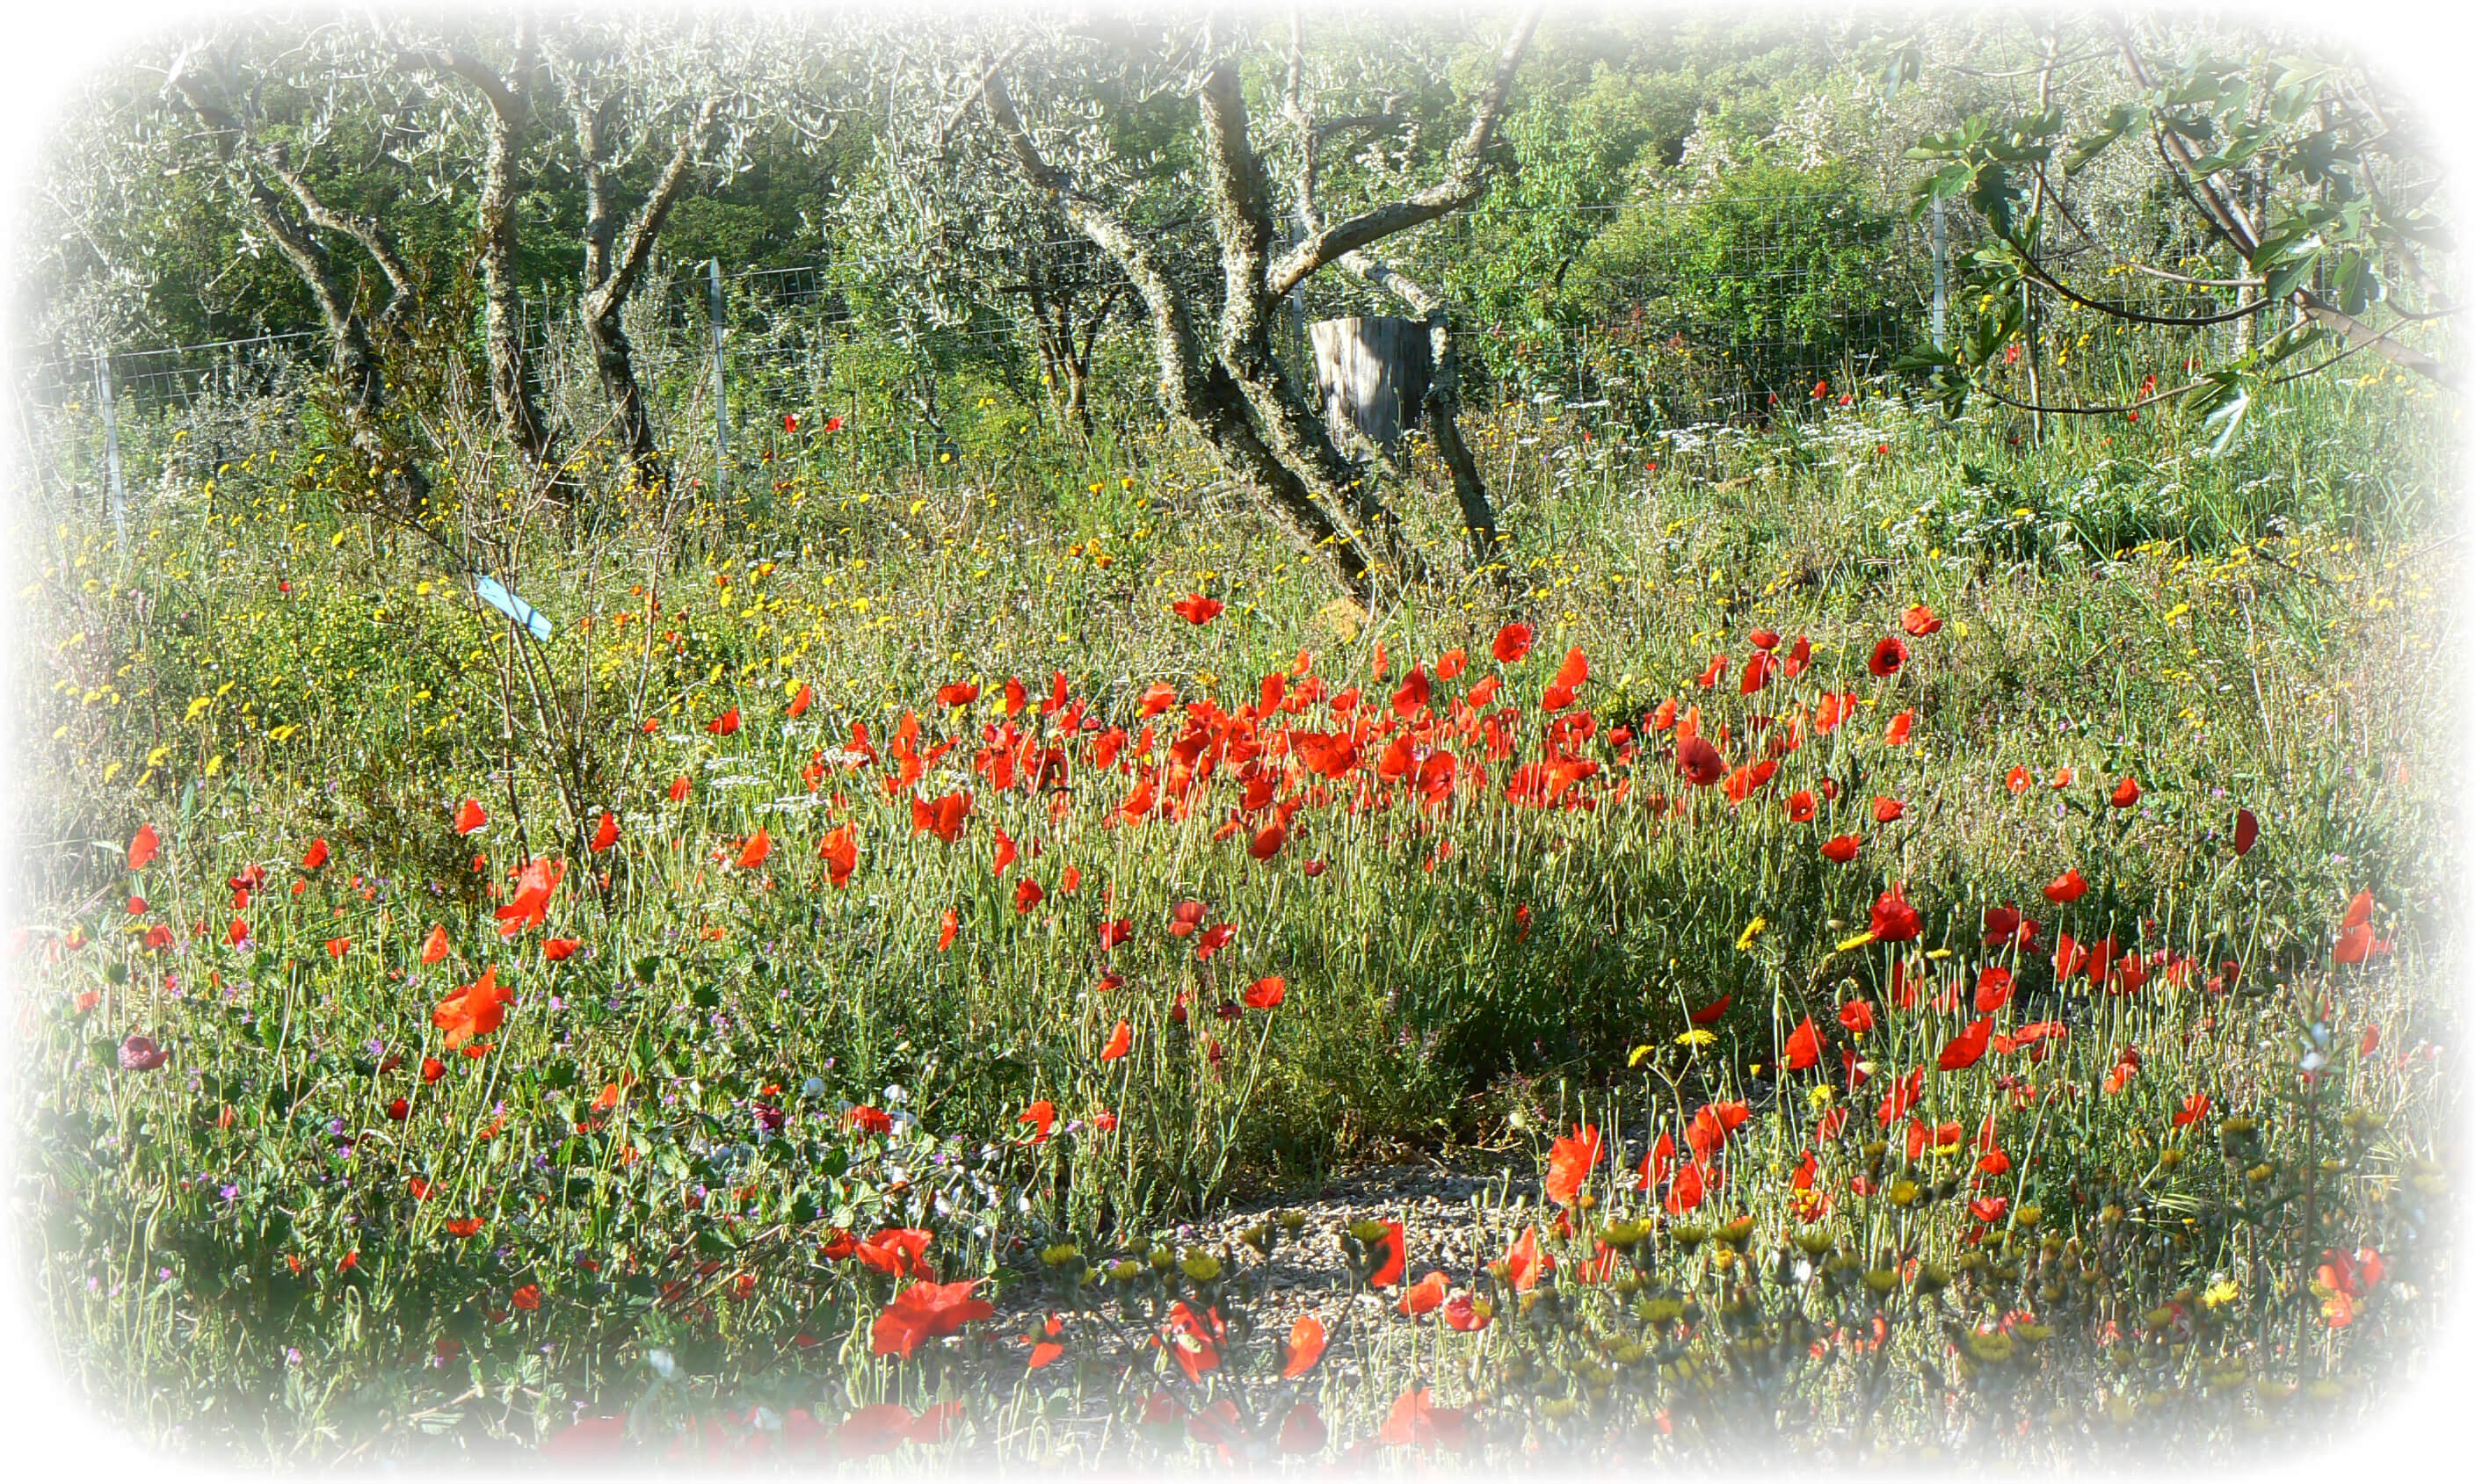 "the poppies ... are just showing off"